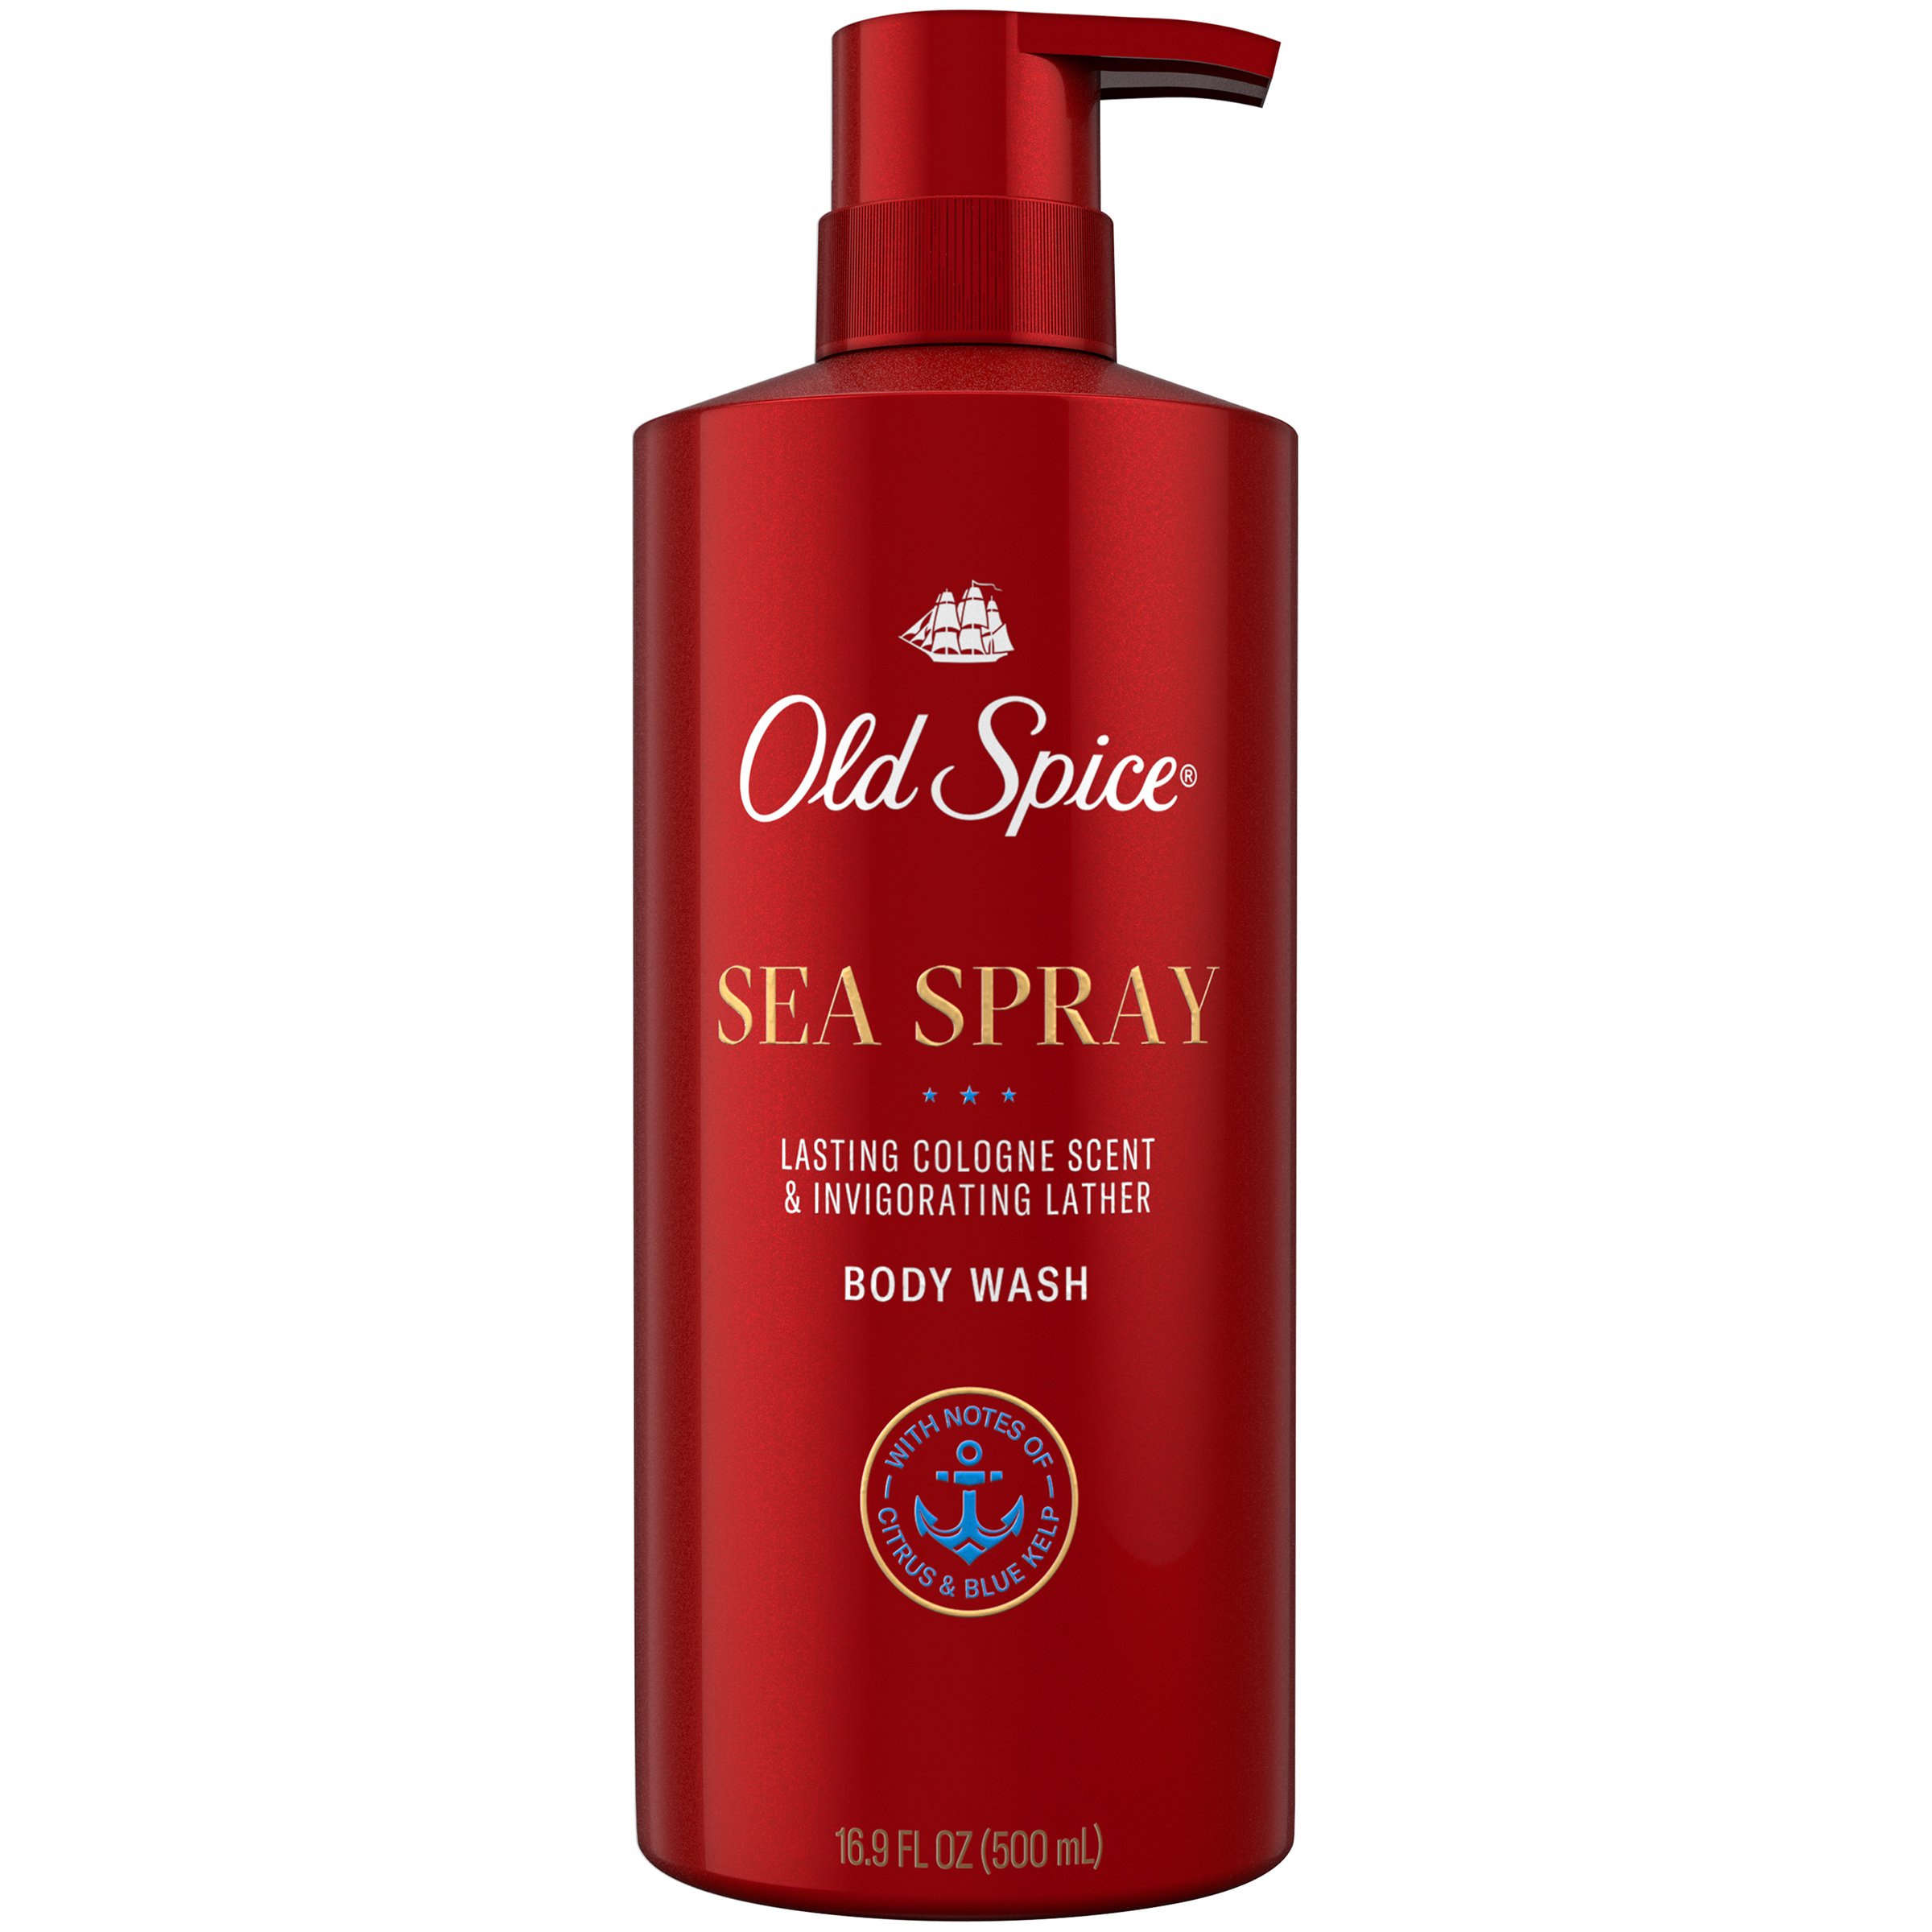 Old Spice Sea Spray Body Wash Shop Cleansers & Soaps at